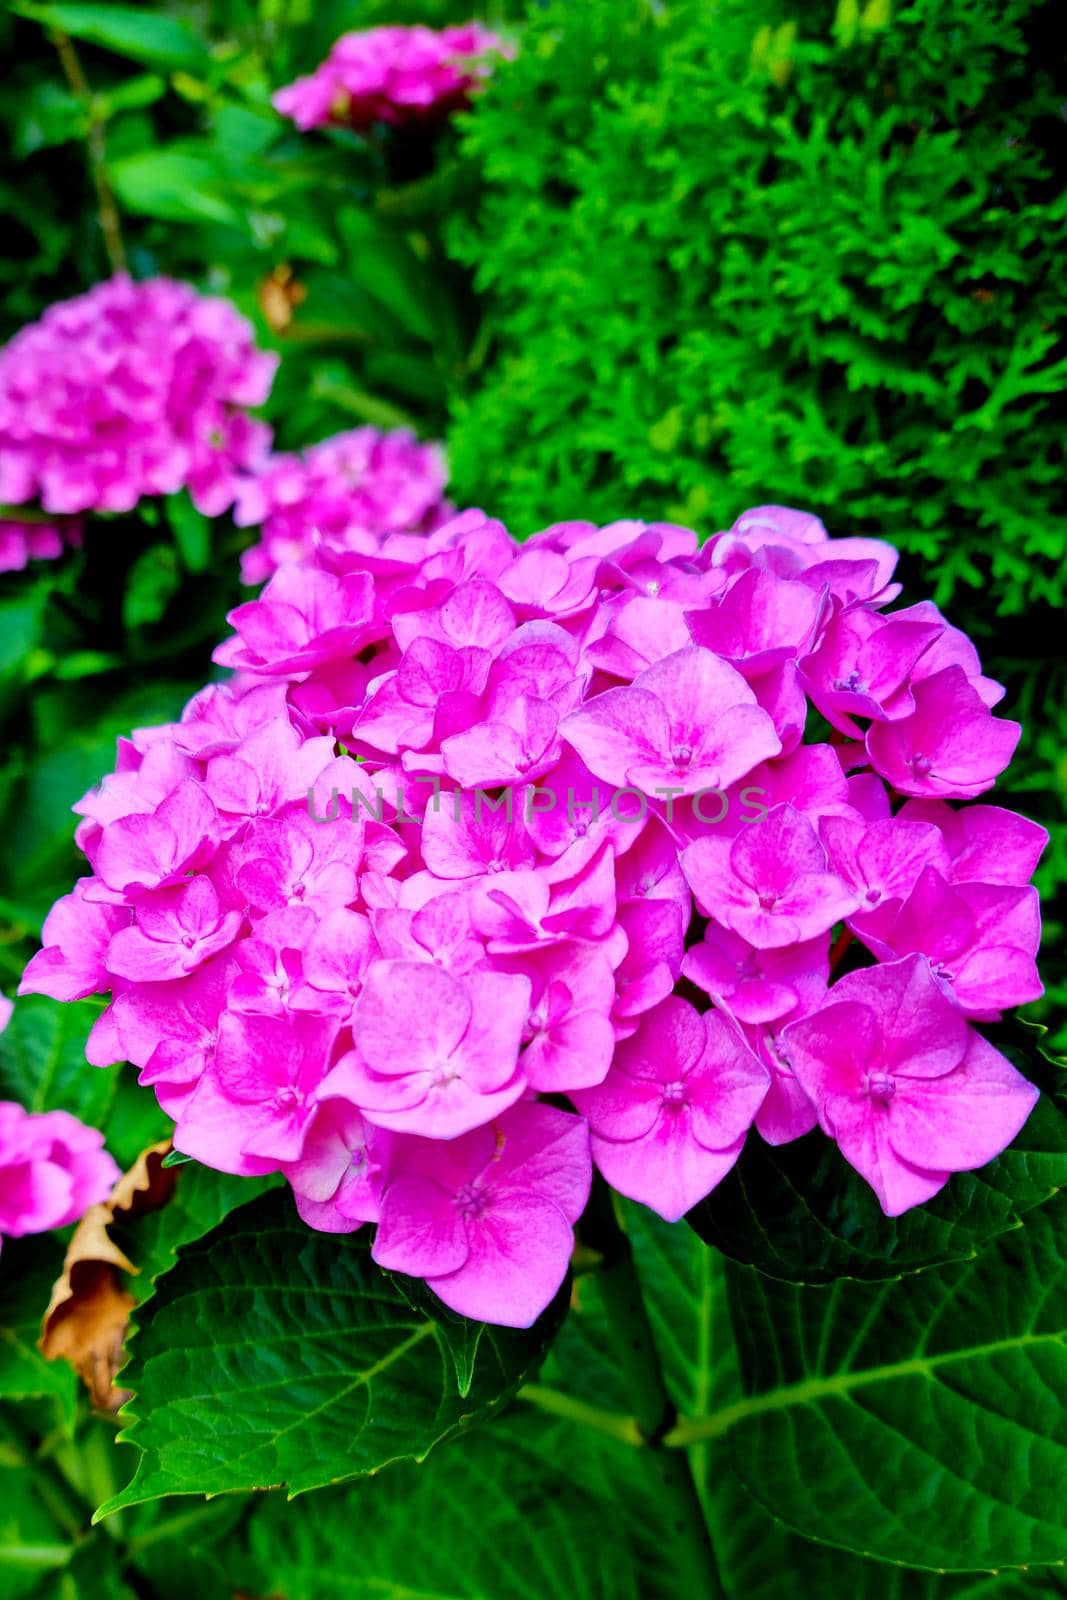 Close-up of hydrangeas blooming in the park in the spring